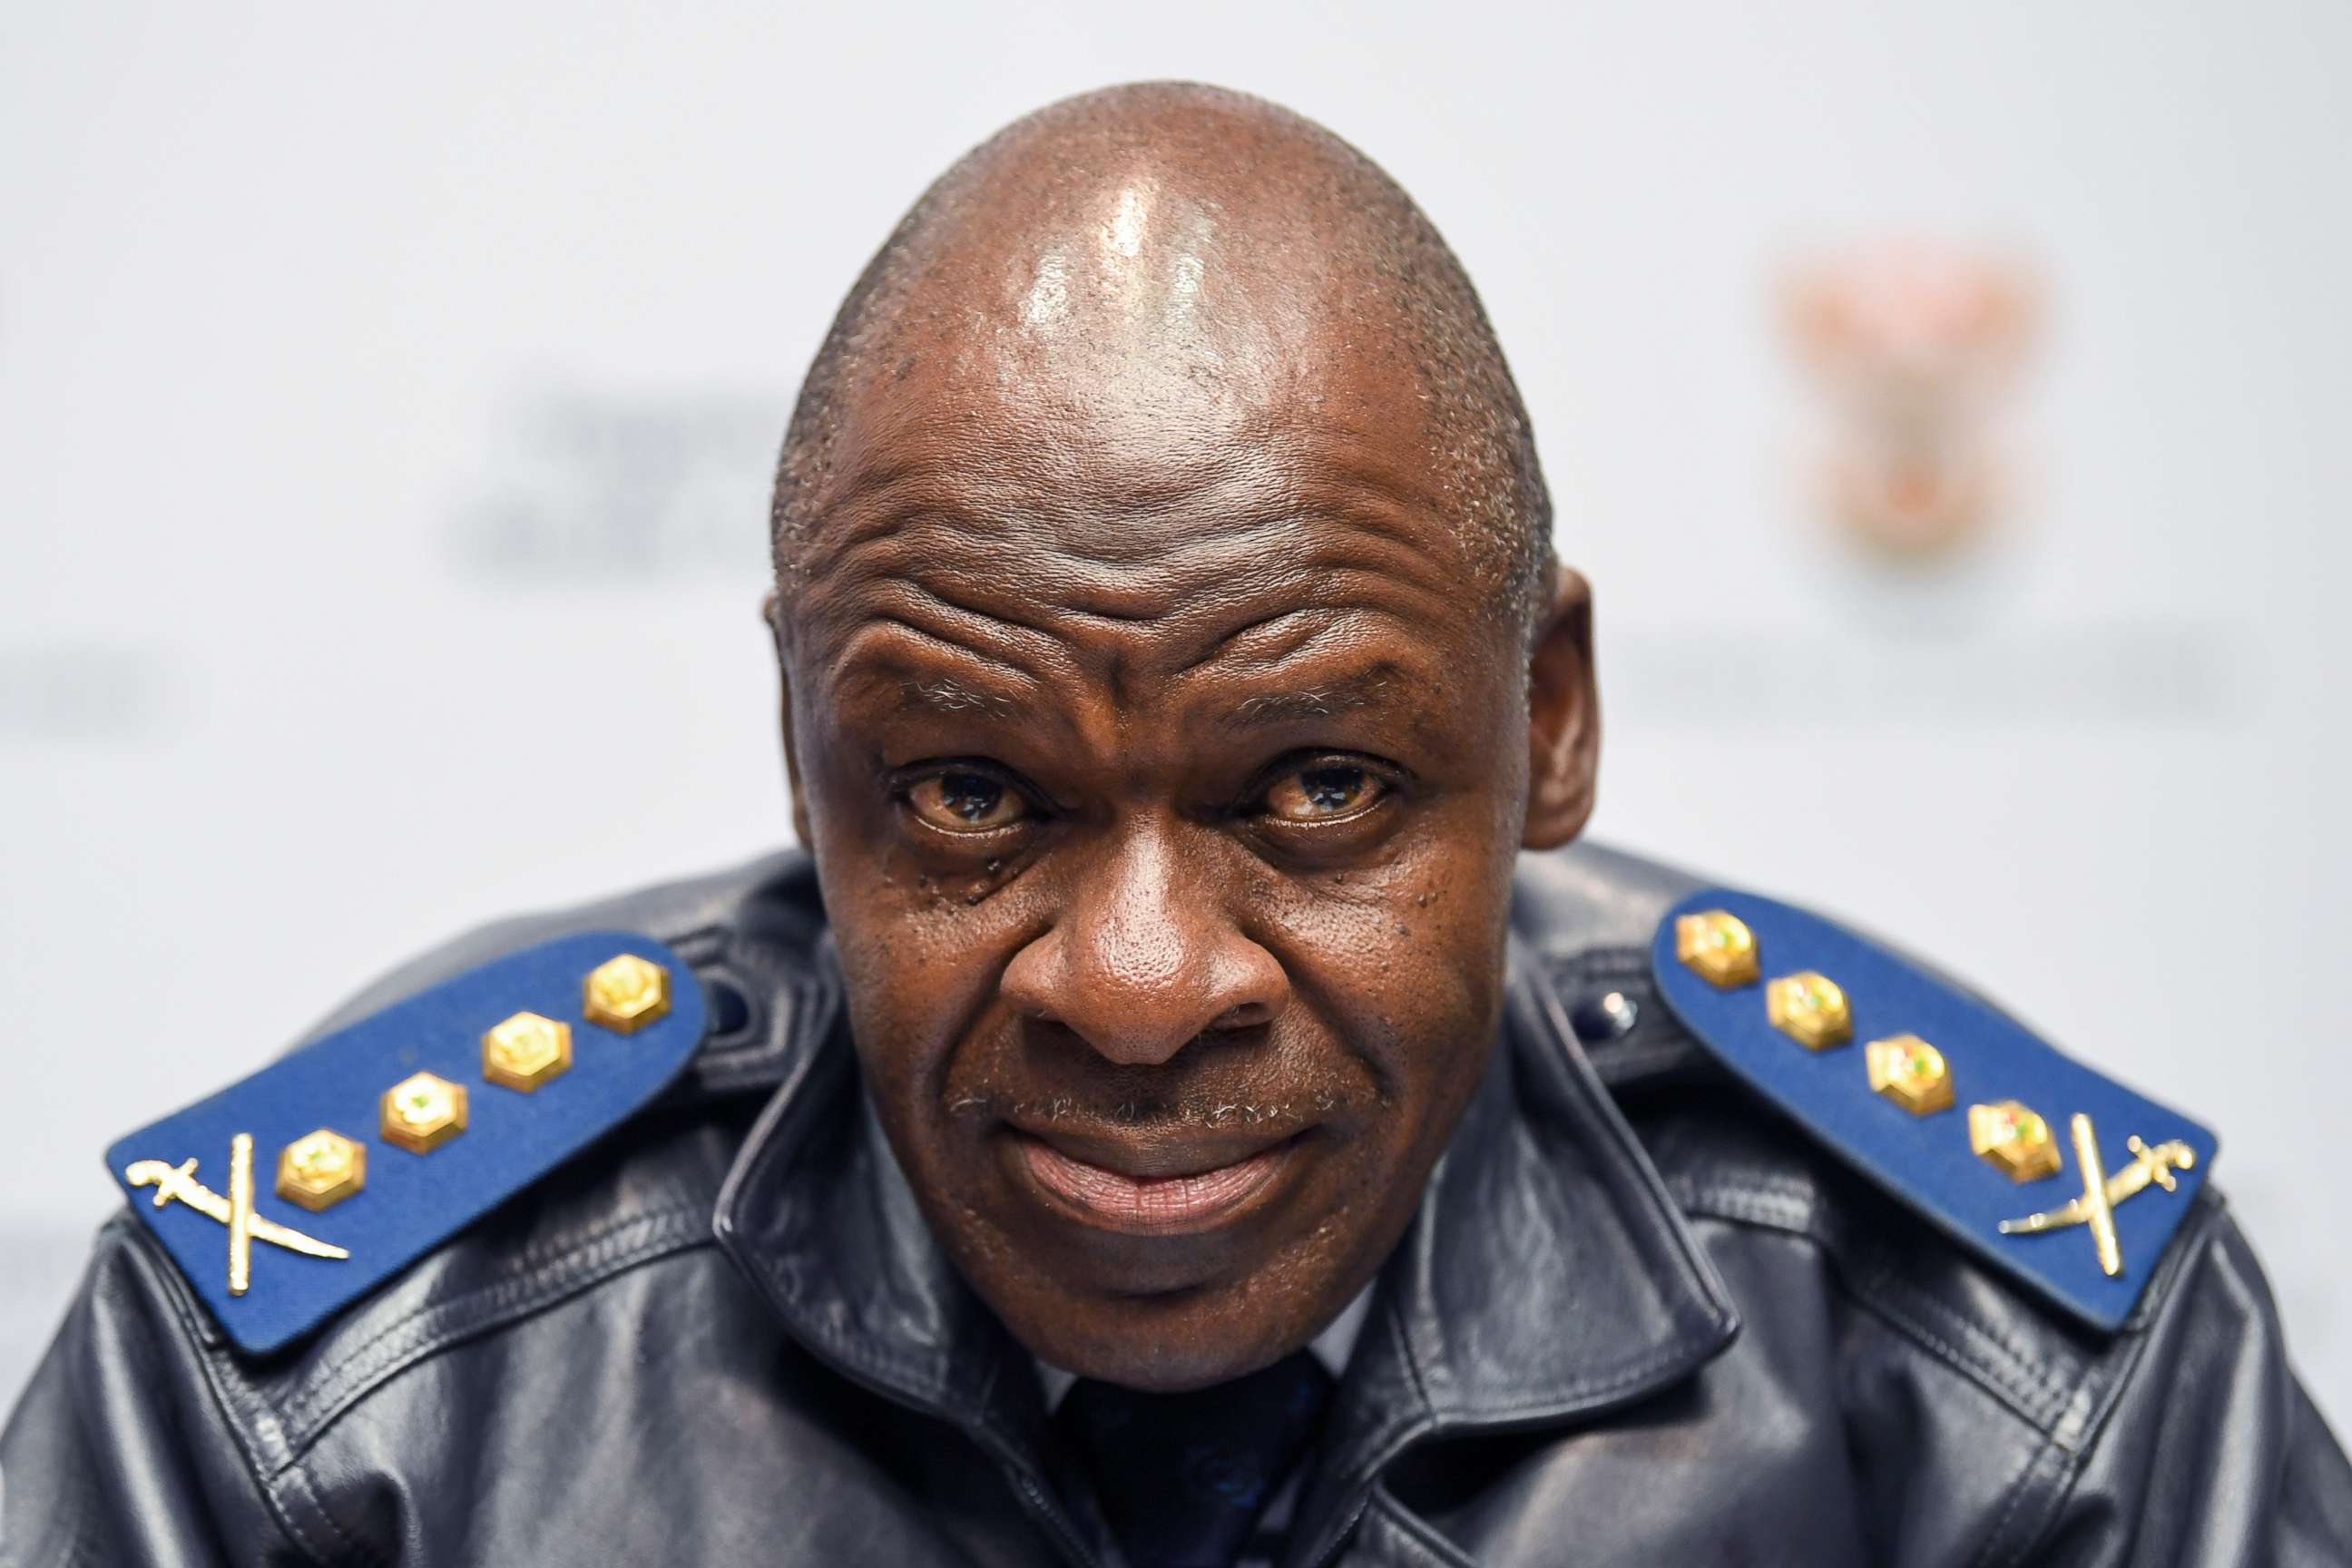 PHOTO: South Africa's National Police Commissioner Gen. Khehla Sitole in Cape Town, South Africa.